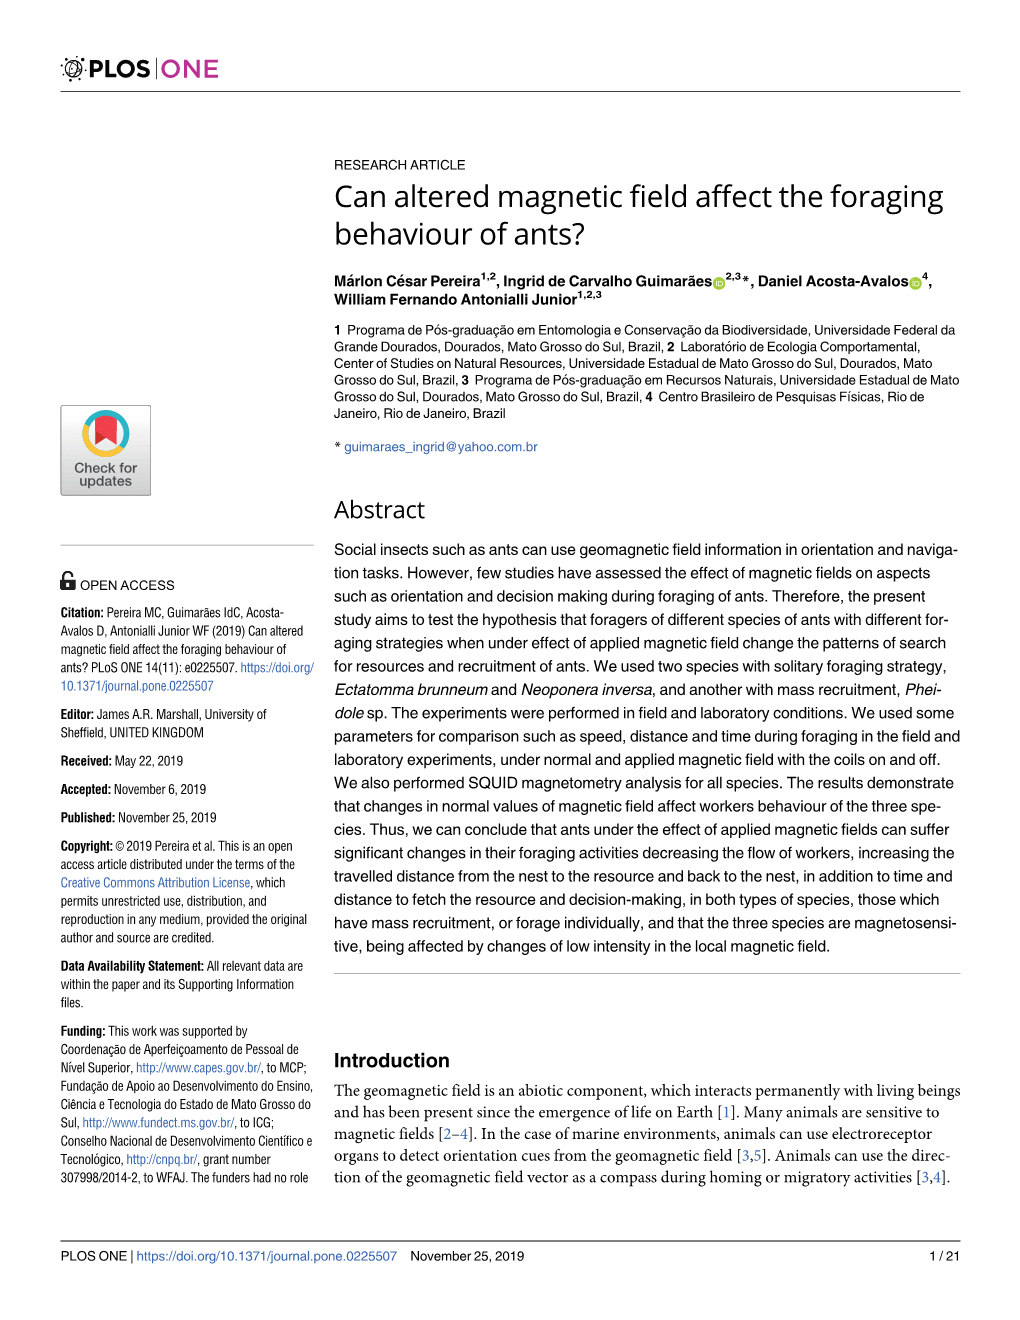 Can Altered Magnetic Field Affect the Foraging Behaviour of Ants?